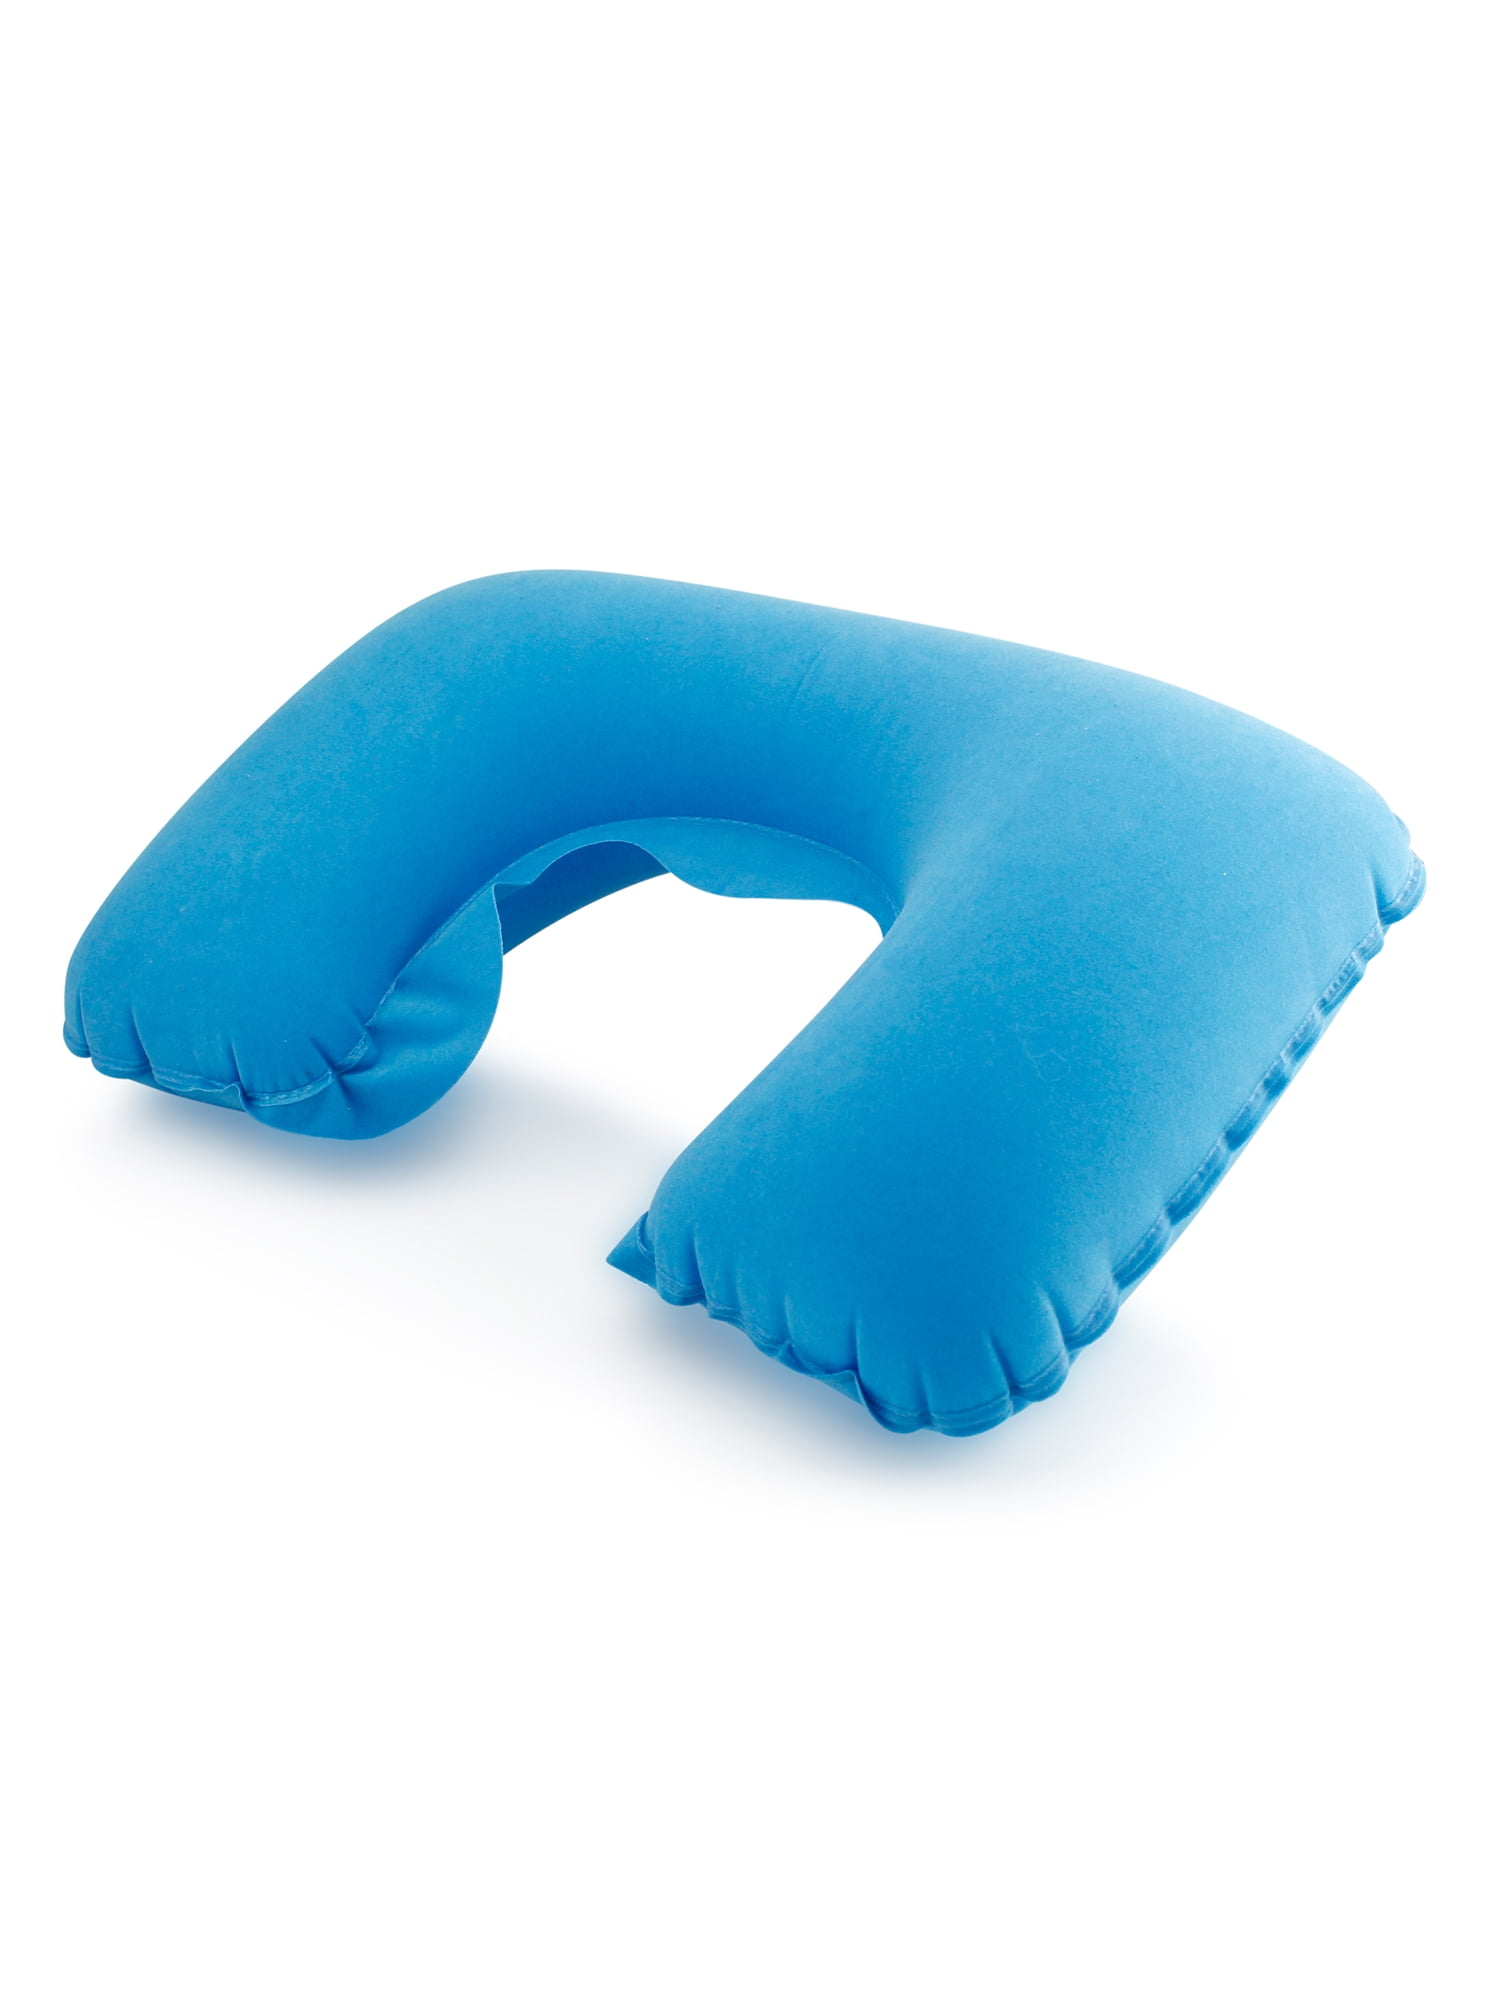 2 X Blue Inflatable Travel Pillow Compact Suede Cushion Camping Flight Support 